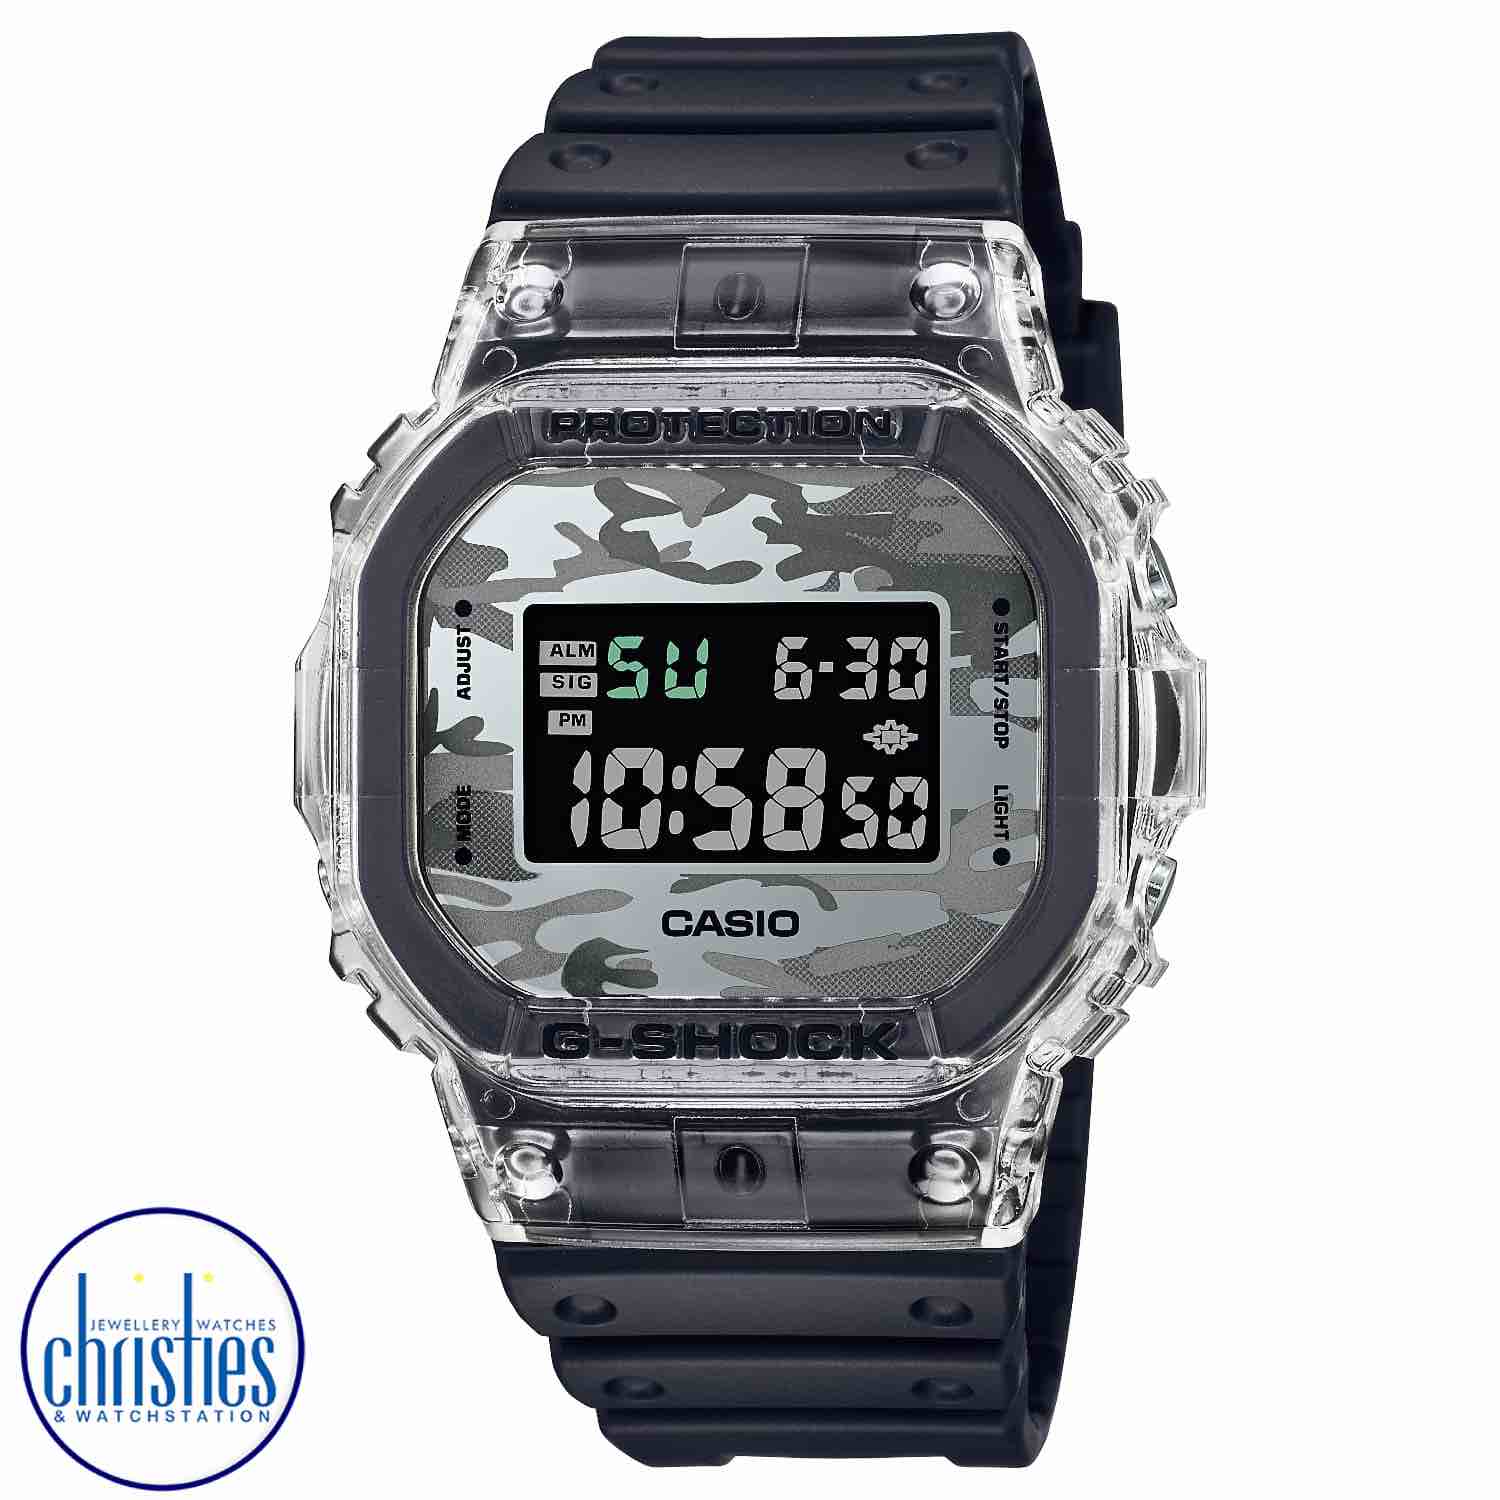 DW5600SKC-1D G-SHOCK  Camouflage Watch. Go stealthily in a G-SHOCK with a camouflage dial and translucent bezel.